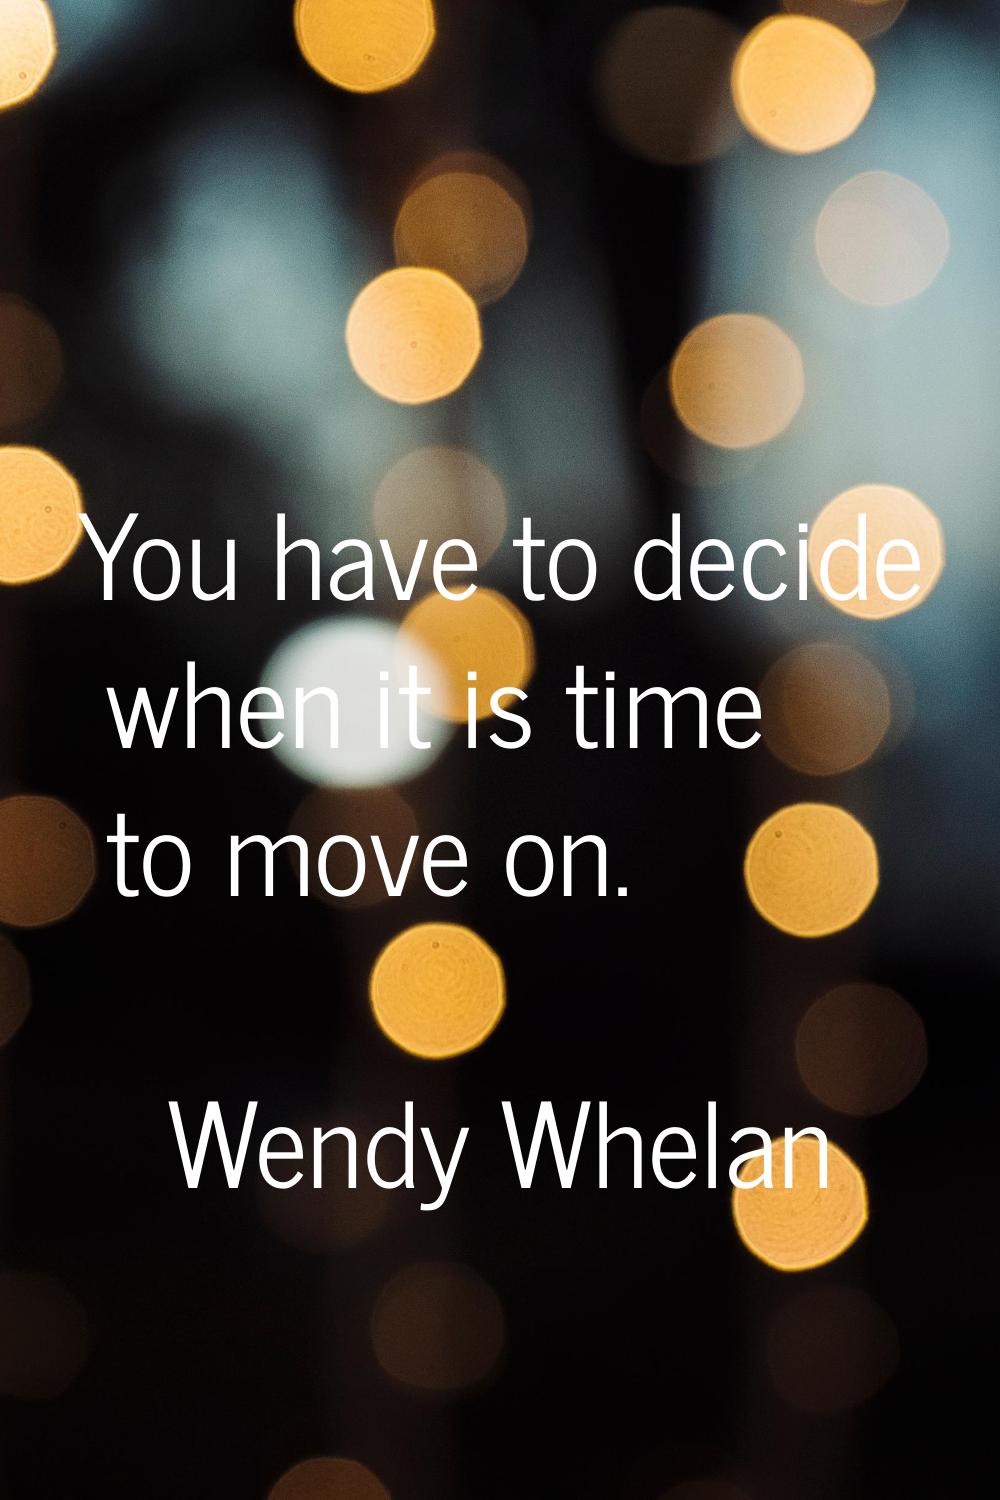 You have to decide when it is time to move on.